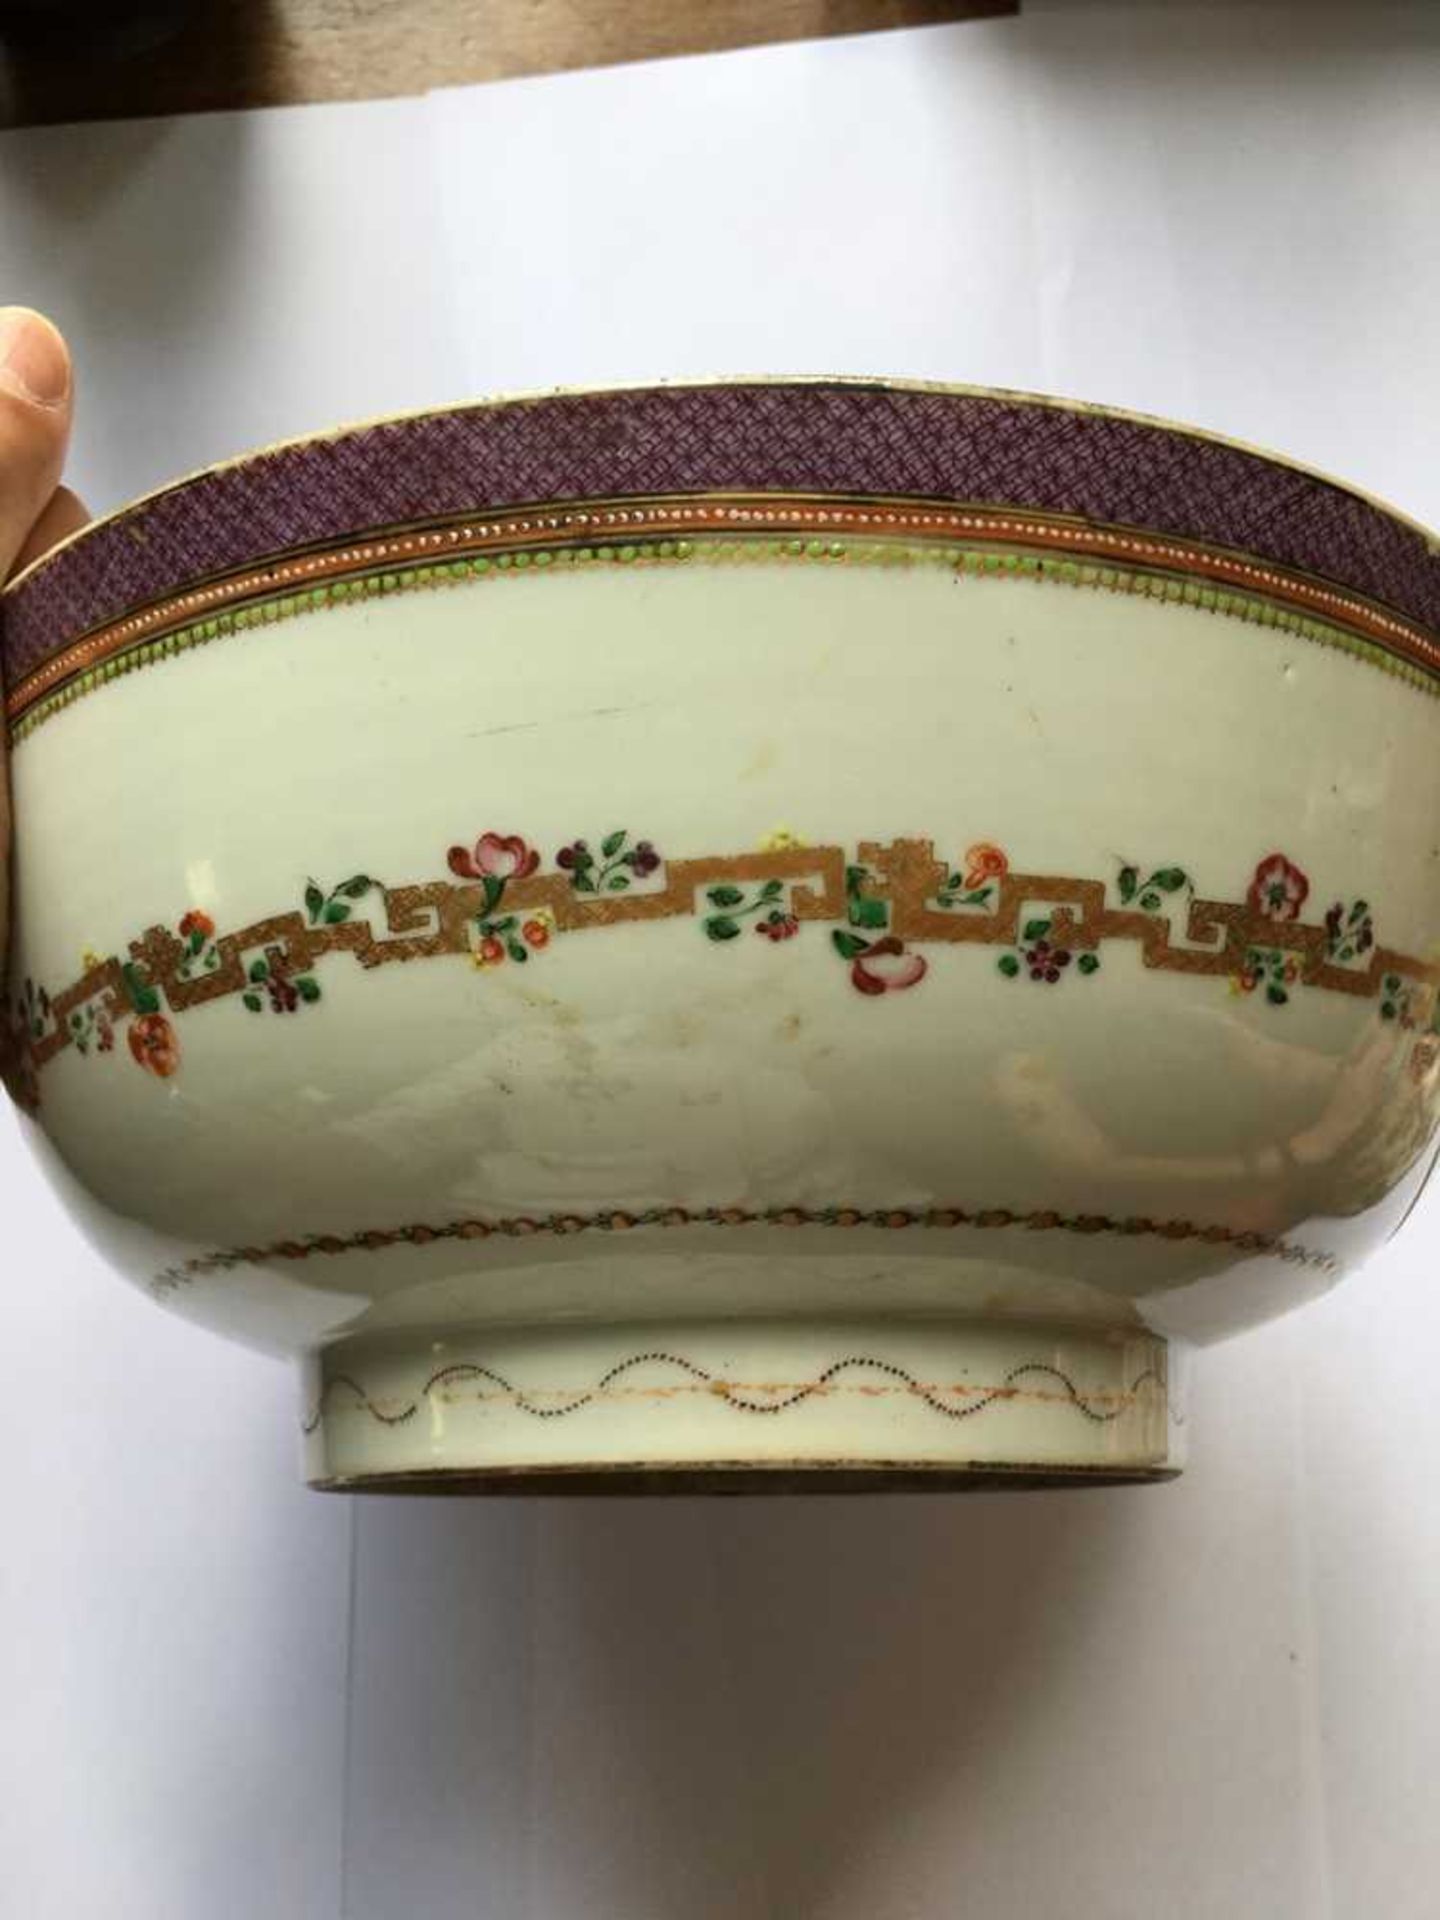 TWO CHINESE EXPORT PORCELAIN PUNCH BOWLS QING DYNASTY, LATE 18TH/19TH CENTURY - Image 6 of 33